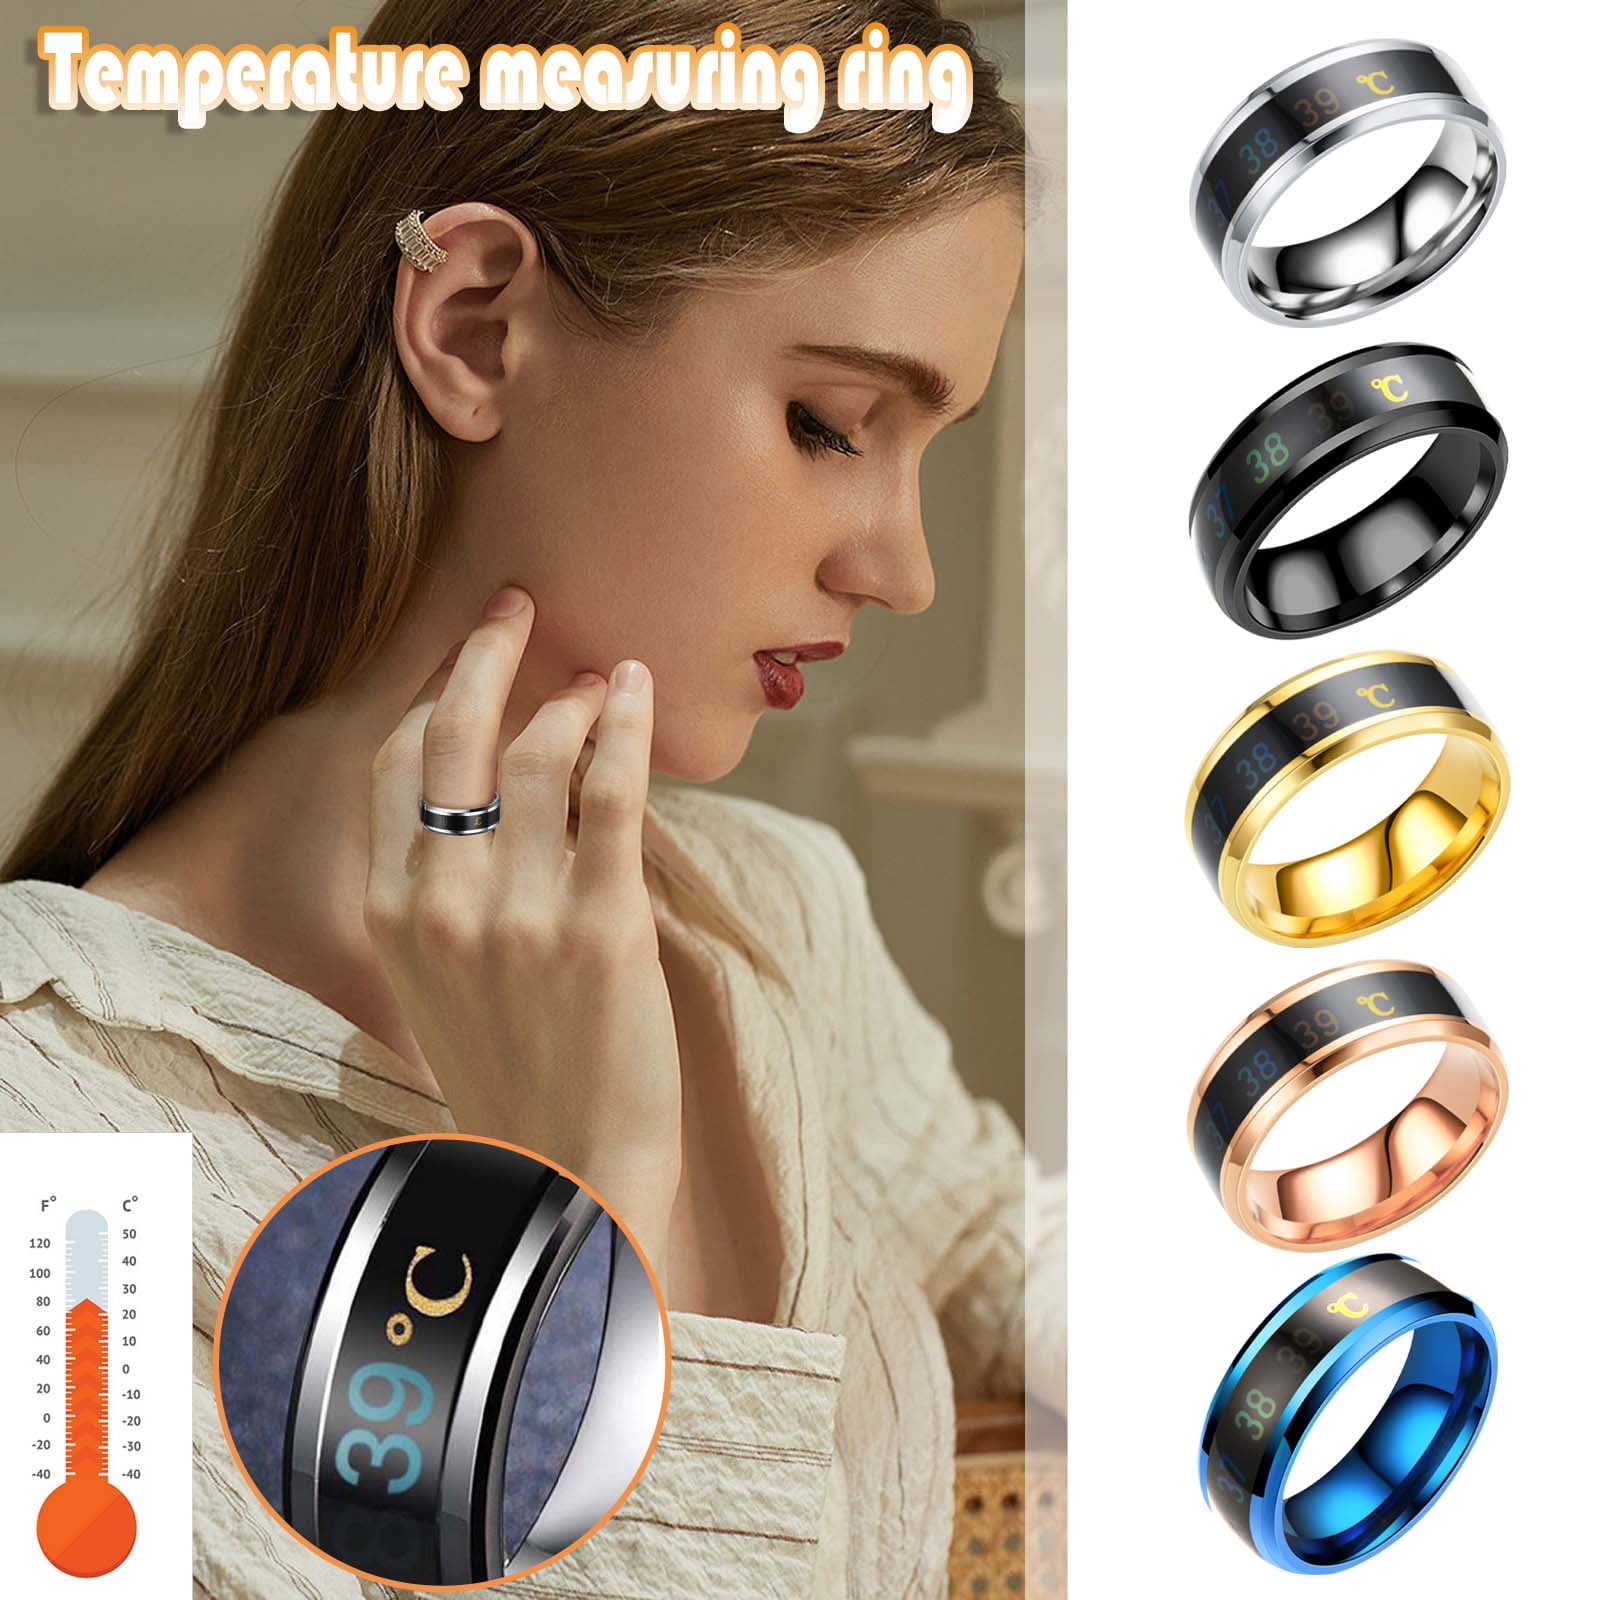 Programmable Wearable Smart Sensing Temperature Ring For Android And IOS  Multi Functional For Men And Women From Marceline, $13.08